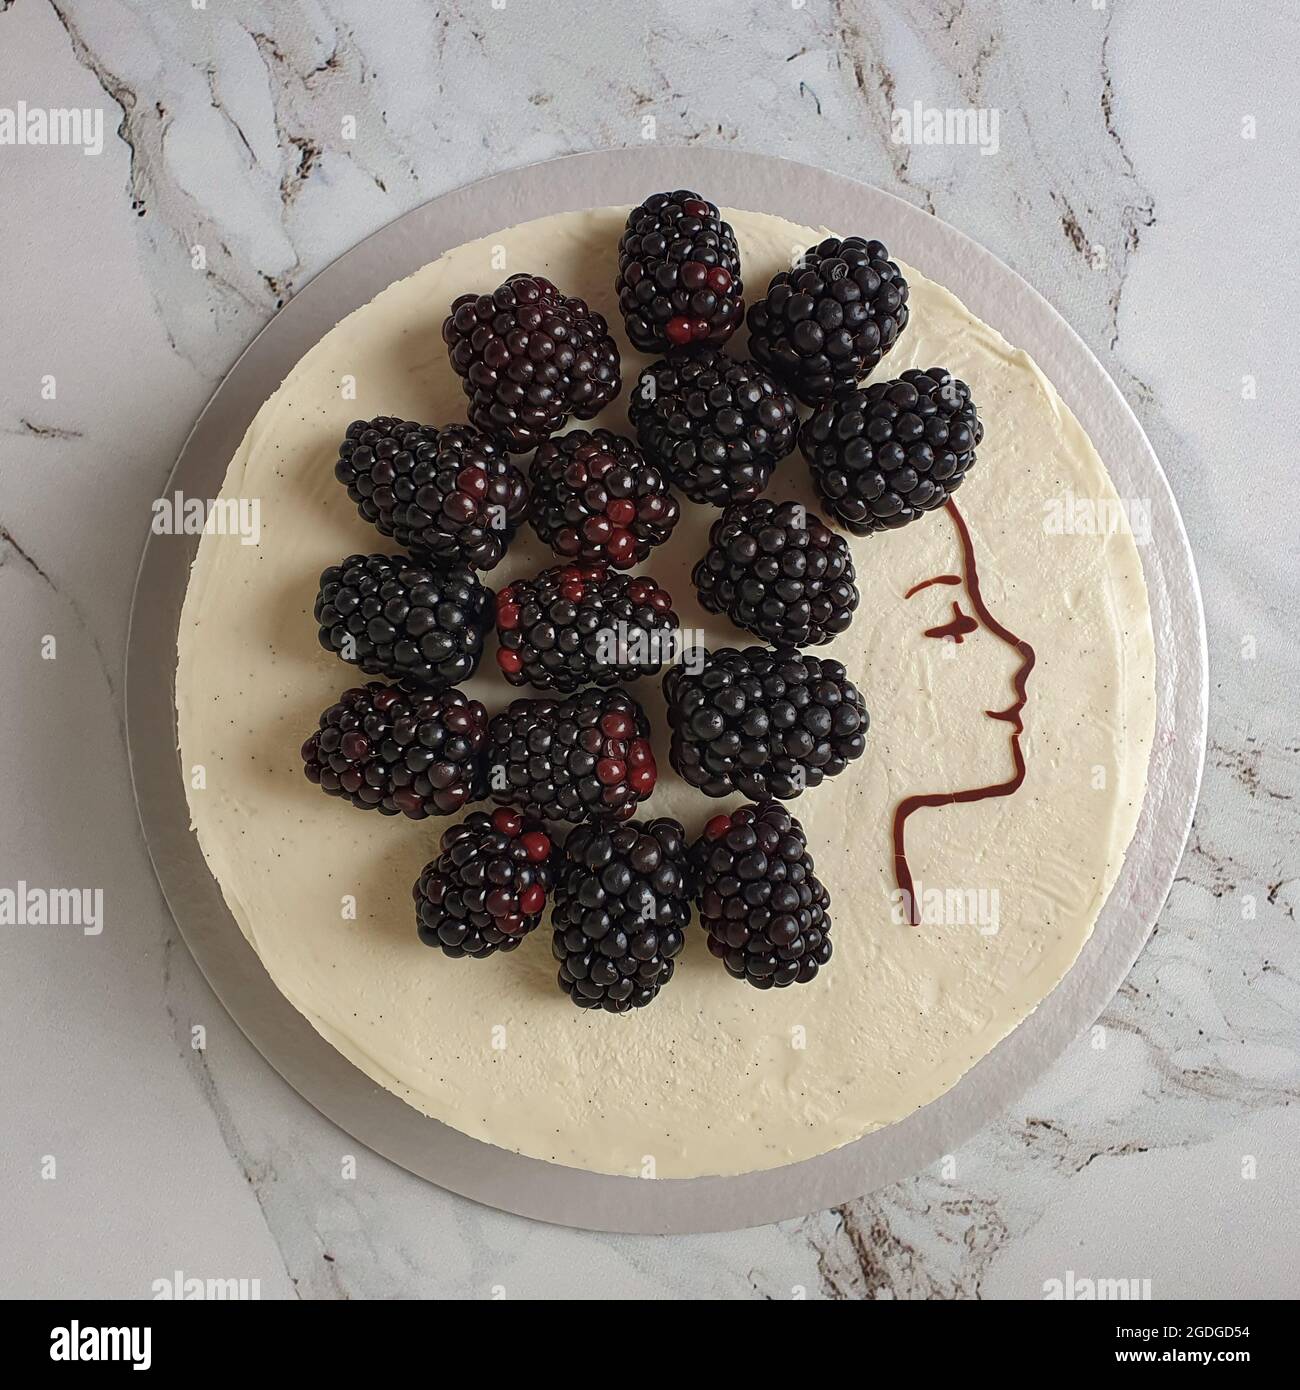 Cheesecake with blackberries and chocolate drawing of girl face Stock Photo